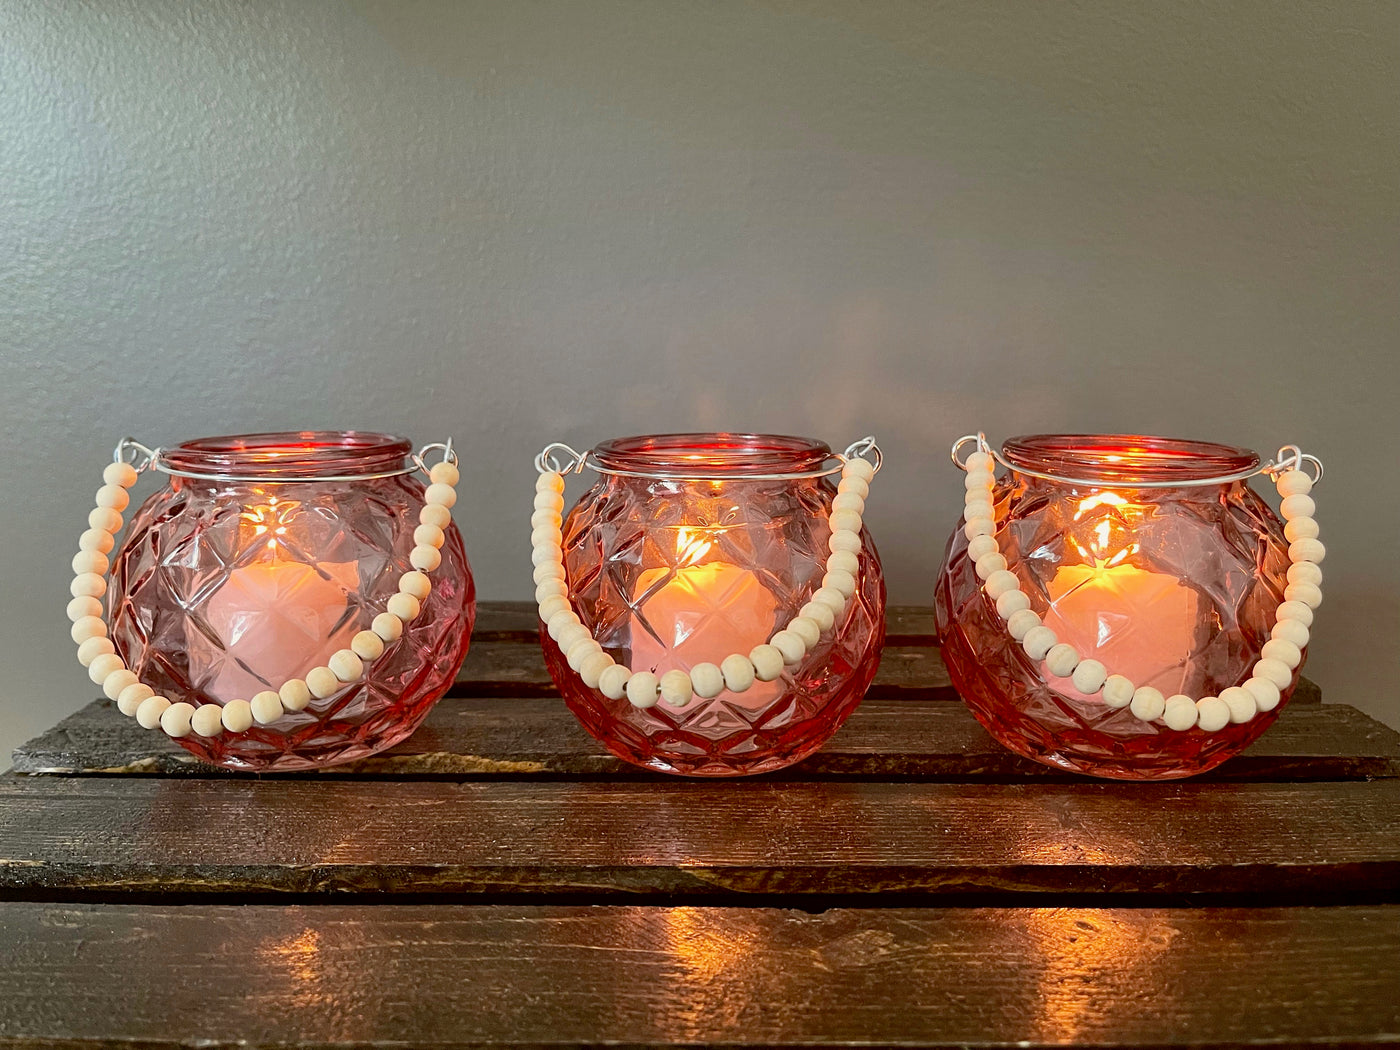 Rent a Rose- Wedding Decor-Adorable diamond patterned pink glass votive with a handle made of wood beads. The price to rent a single votive including candle is $3.00